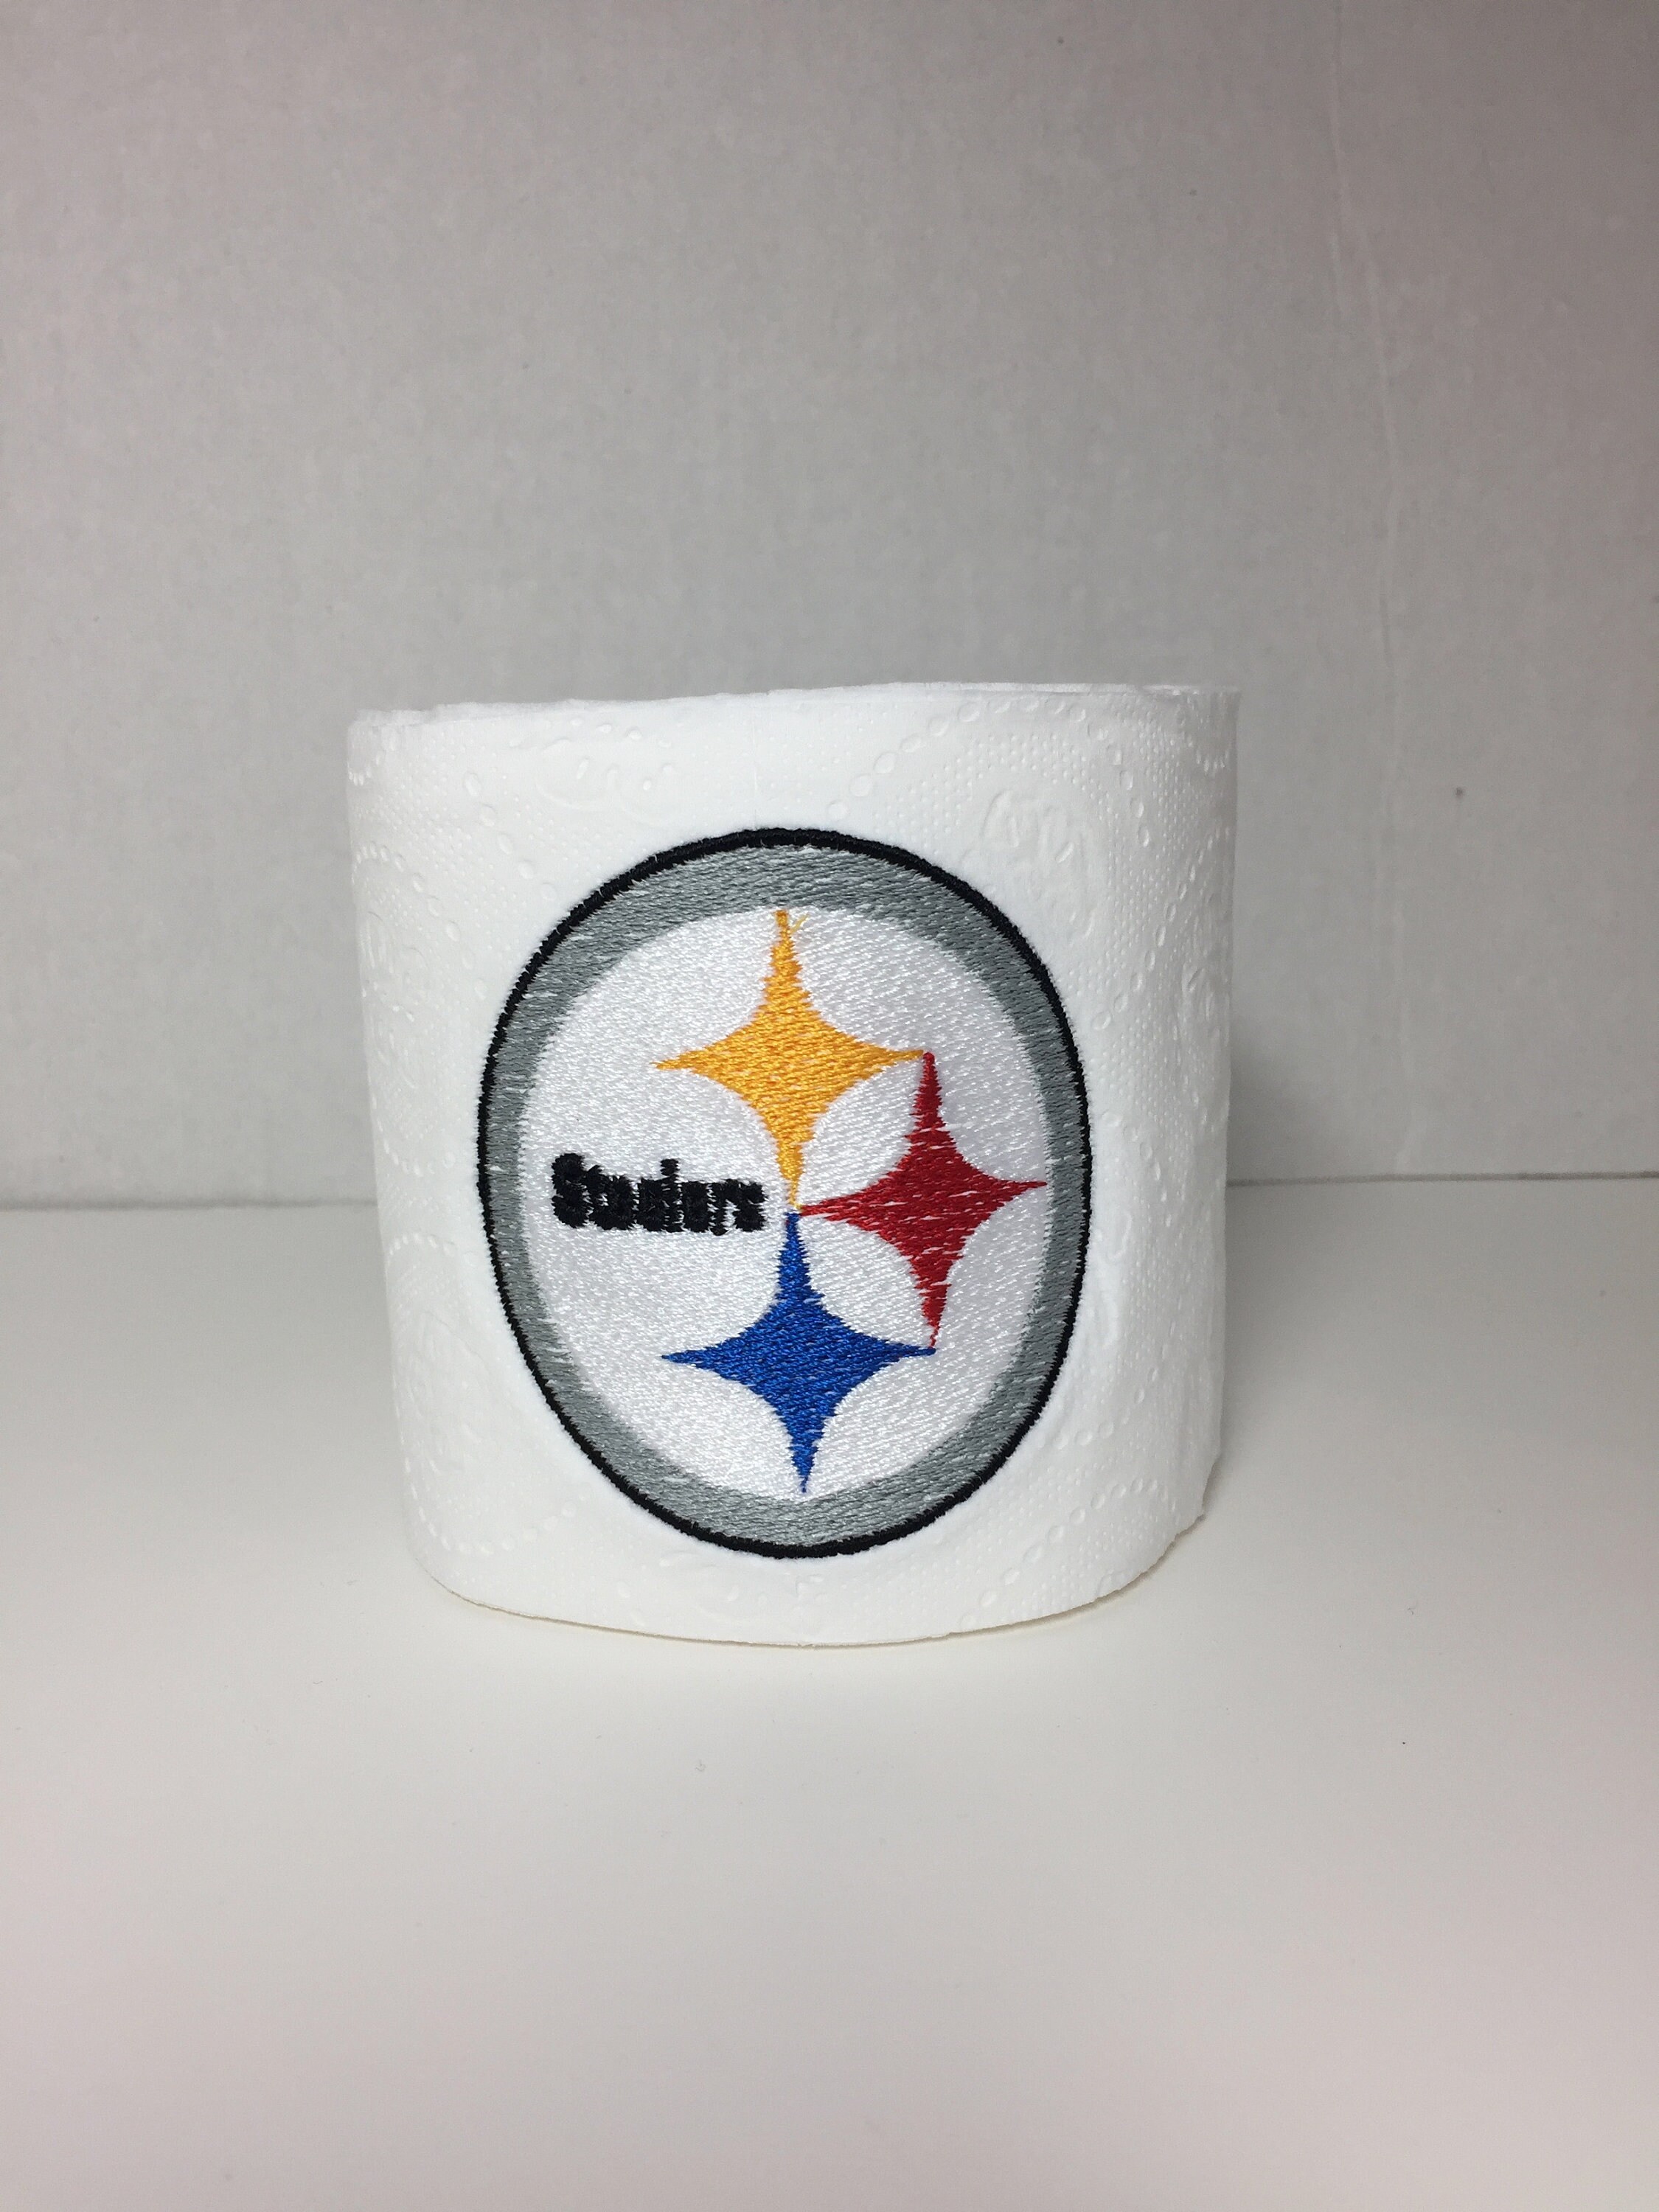 Pittsburgh Steelers Toilet Paper Gag Gift Embroidery Design 